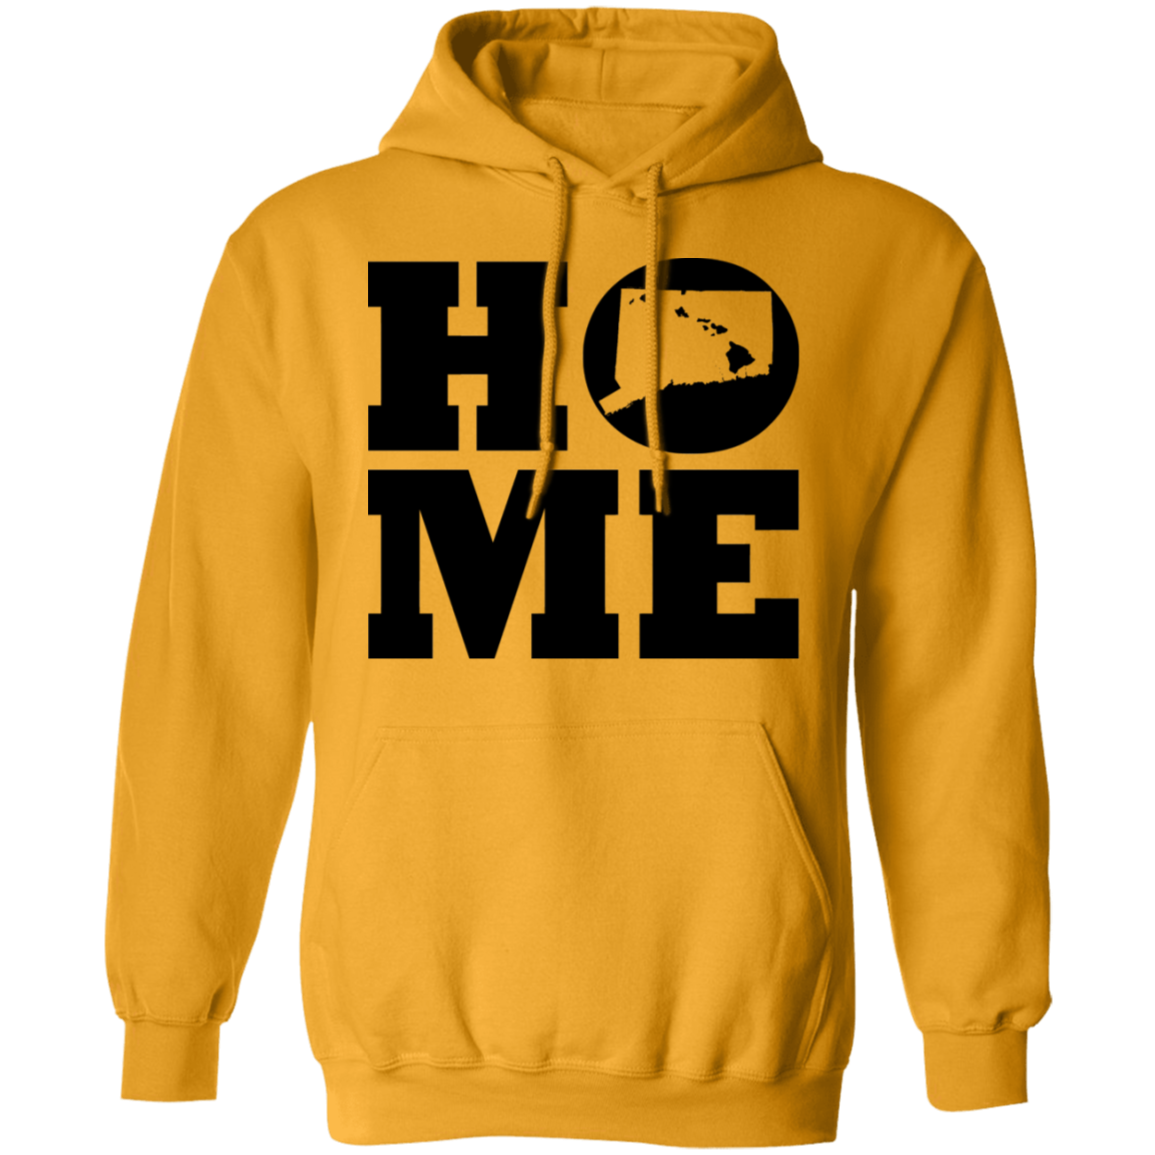 Home Roots Hawai'i and Connecticut Pullover Hoodie